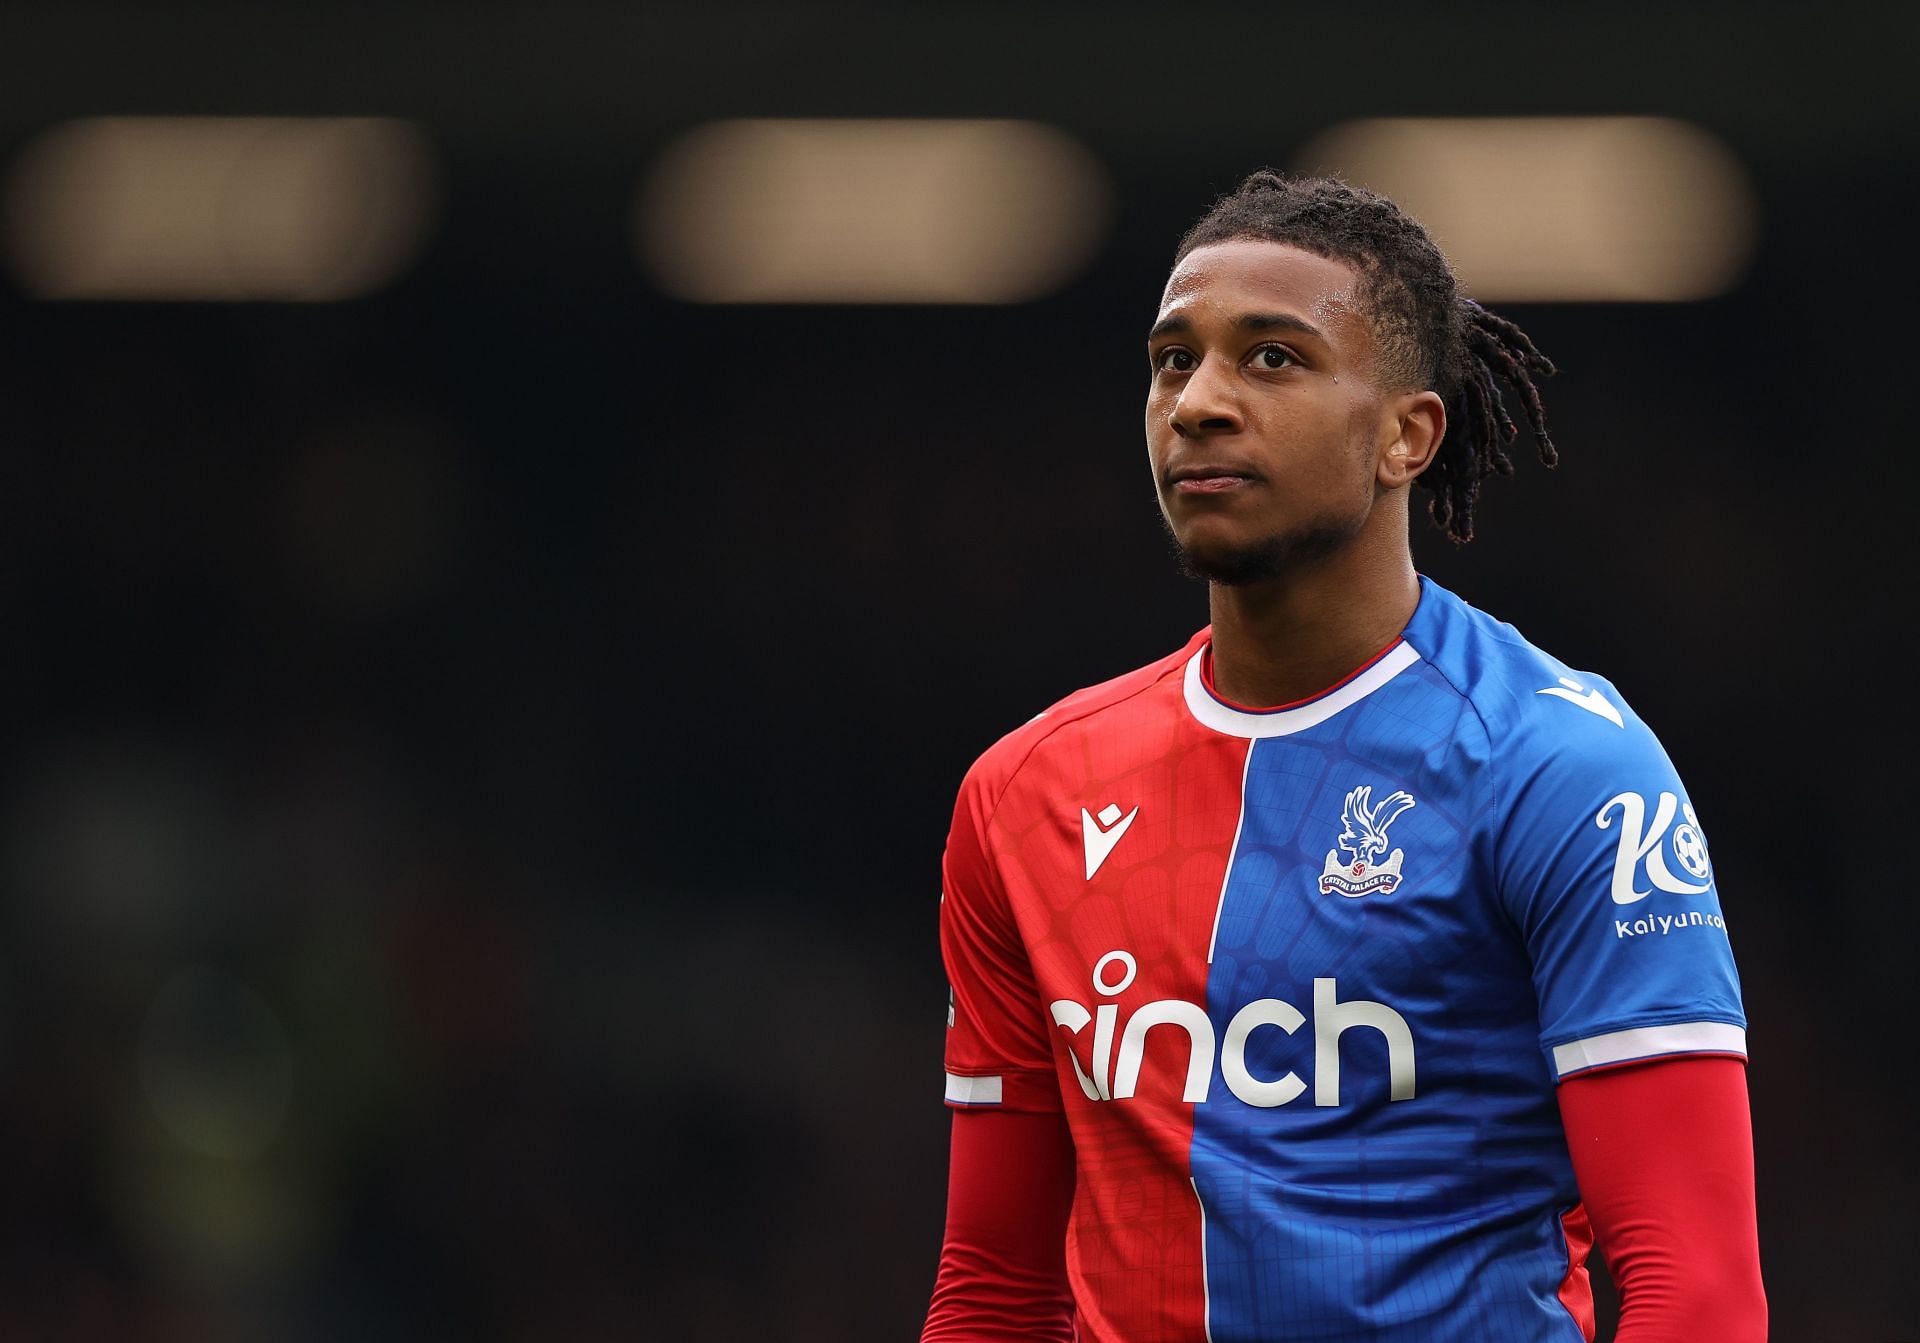 Olise might be eyeing a move away from Crystal Palace.